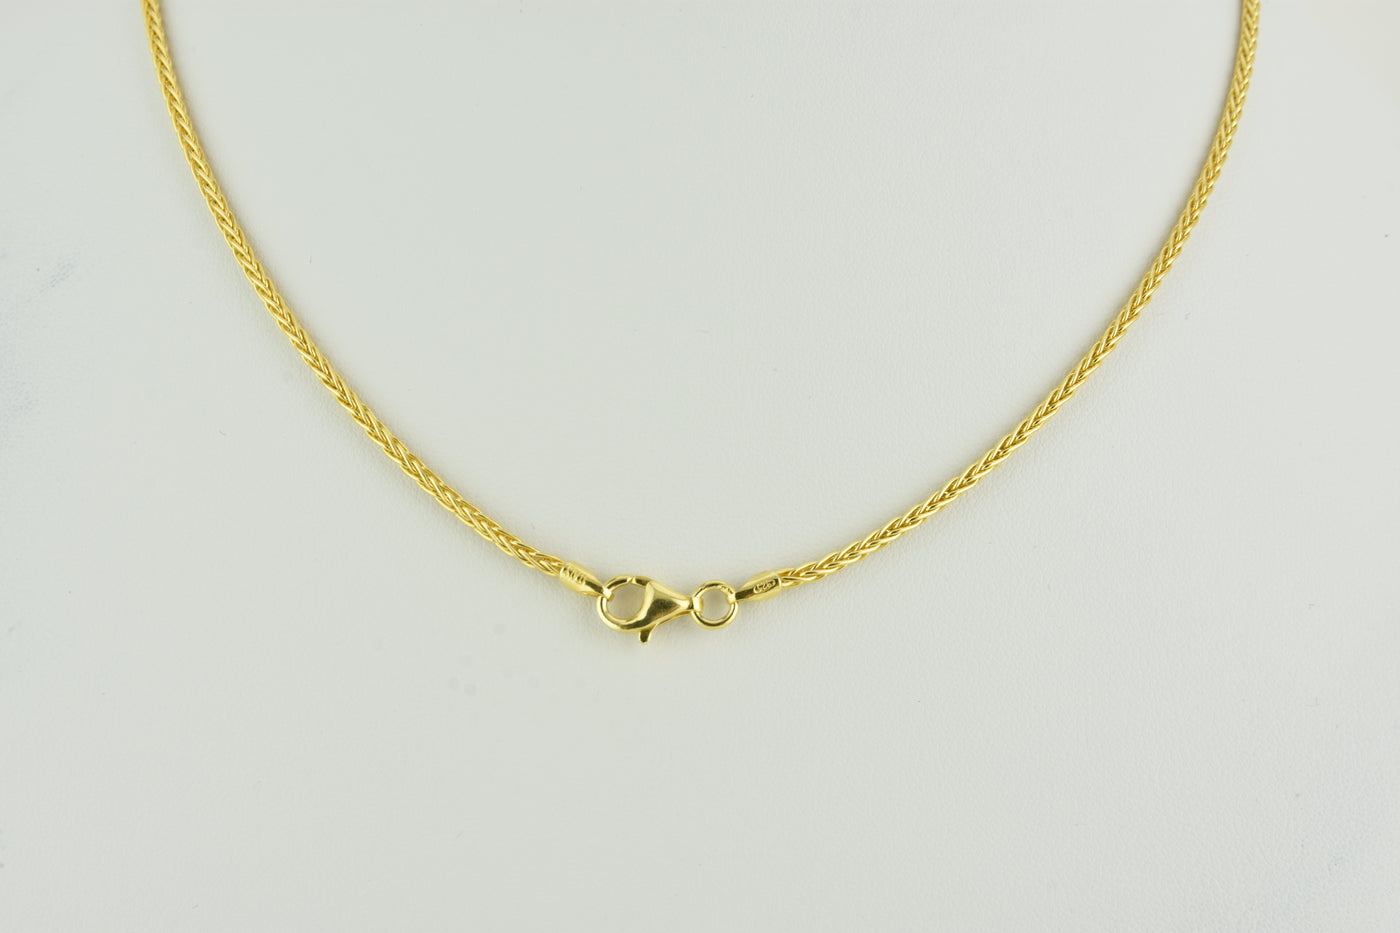 Italian Braid Sterling Silver Chain with Yellow Gold Plate